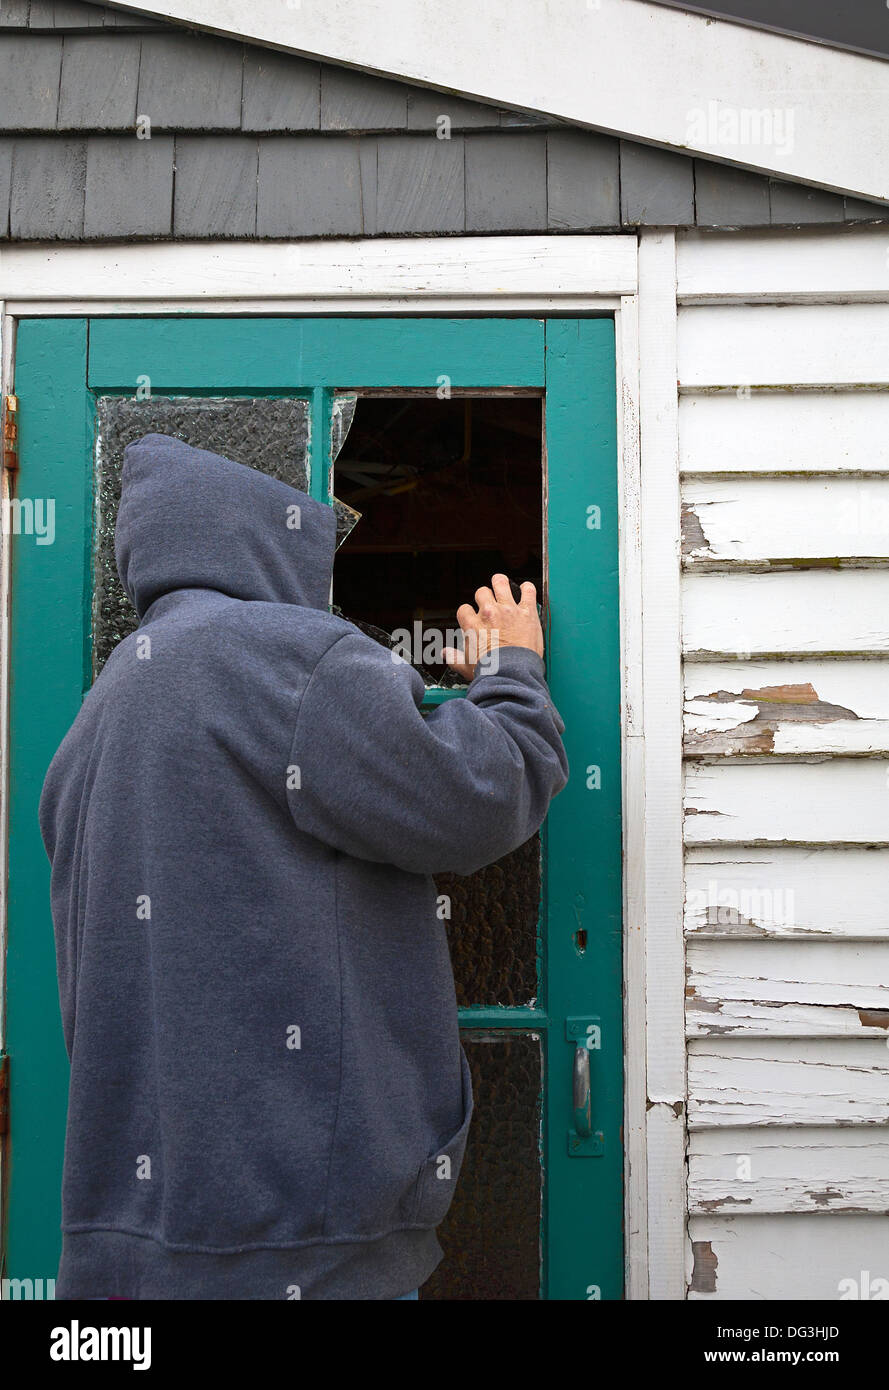 A suspicious person, man wearing a hooded jacket peering through a broken window pane in a door of a garden shed. Stock Photo